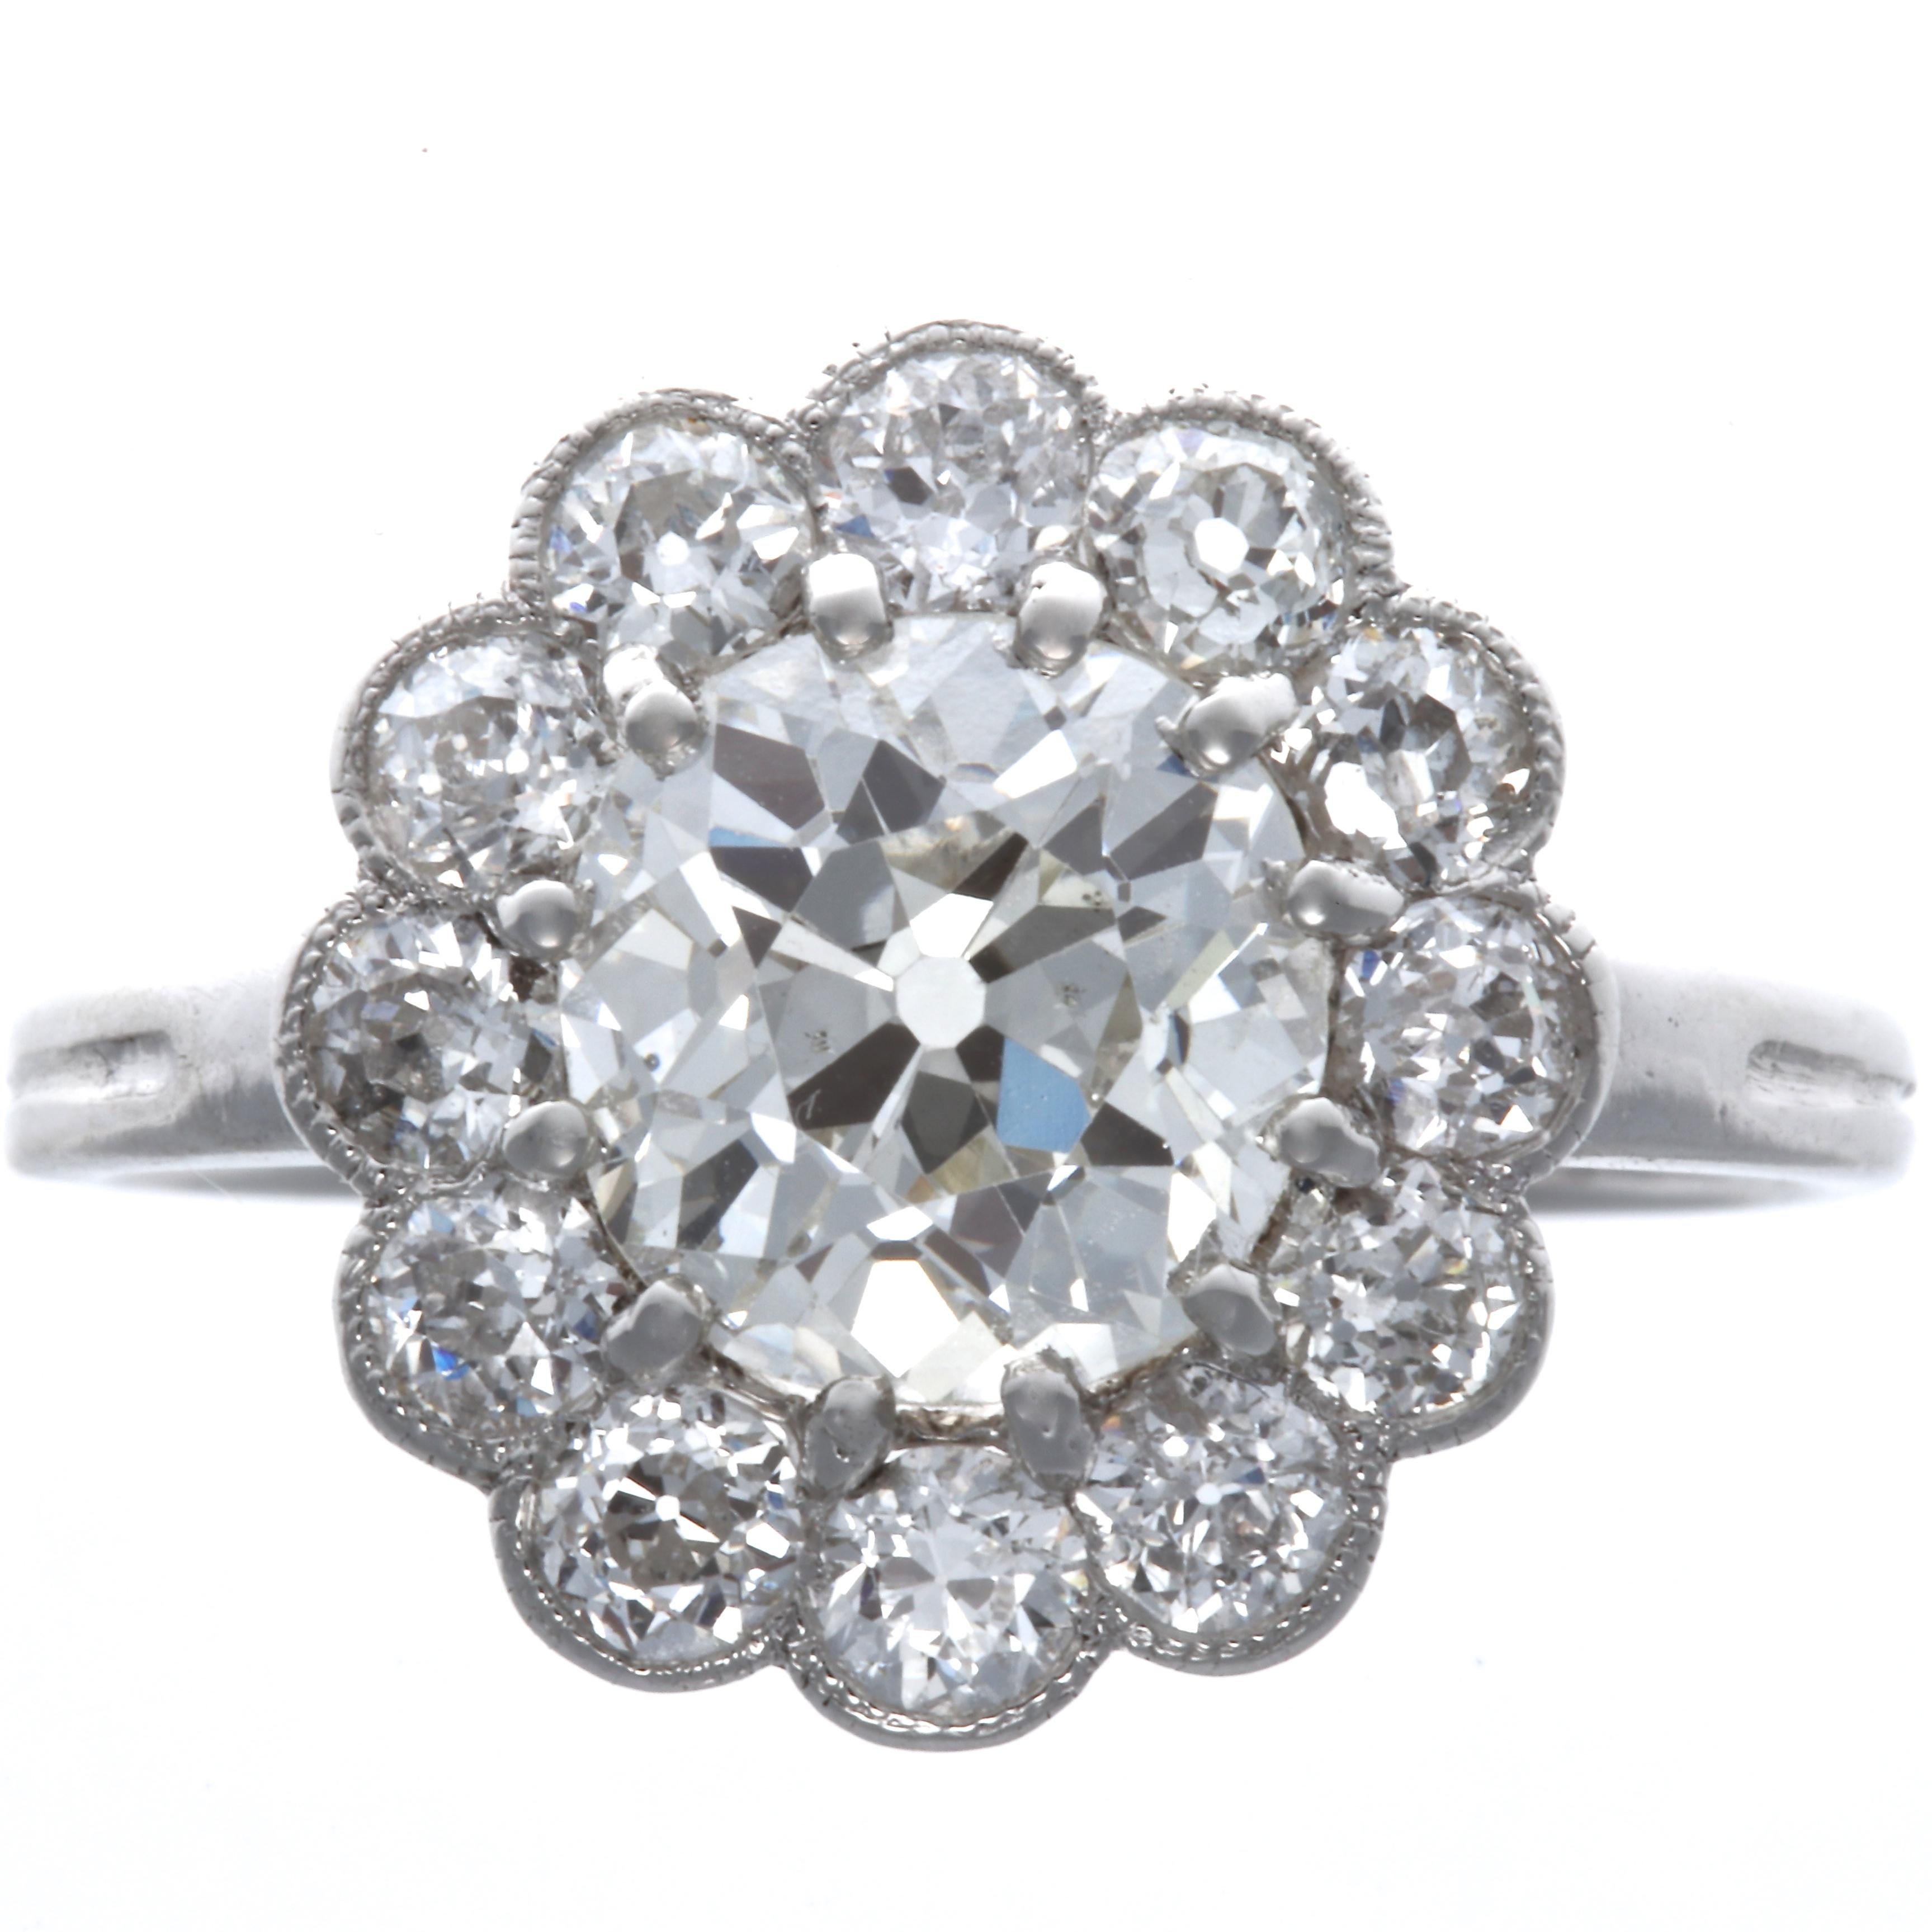 The perfect Edwardian diamond flower motif cluster ring from the 1900s. The ring is graceful and the smooth, thin band makes it a perfect everyday accessory. Enjoy the freshness of this beauty from long ago. GIA certified 1.73 carats old European